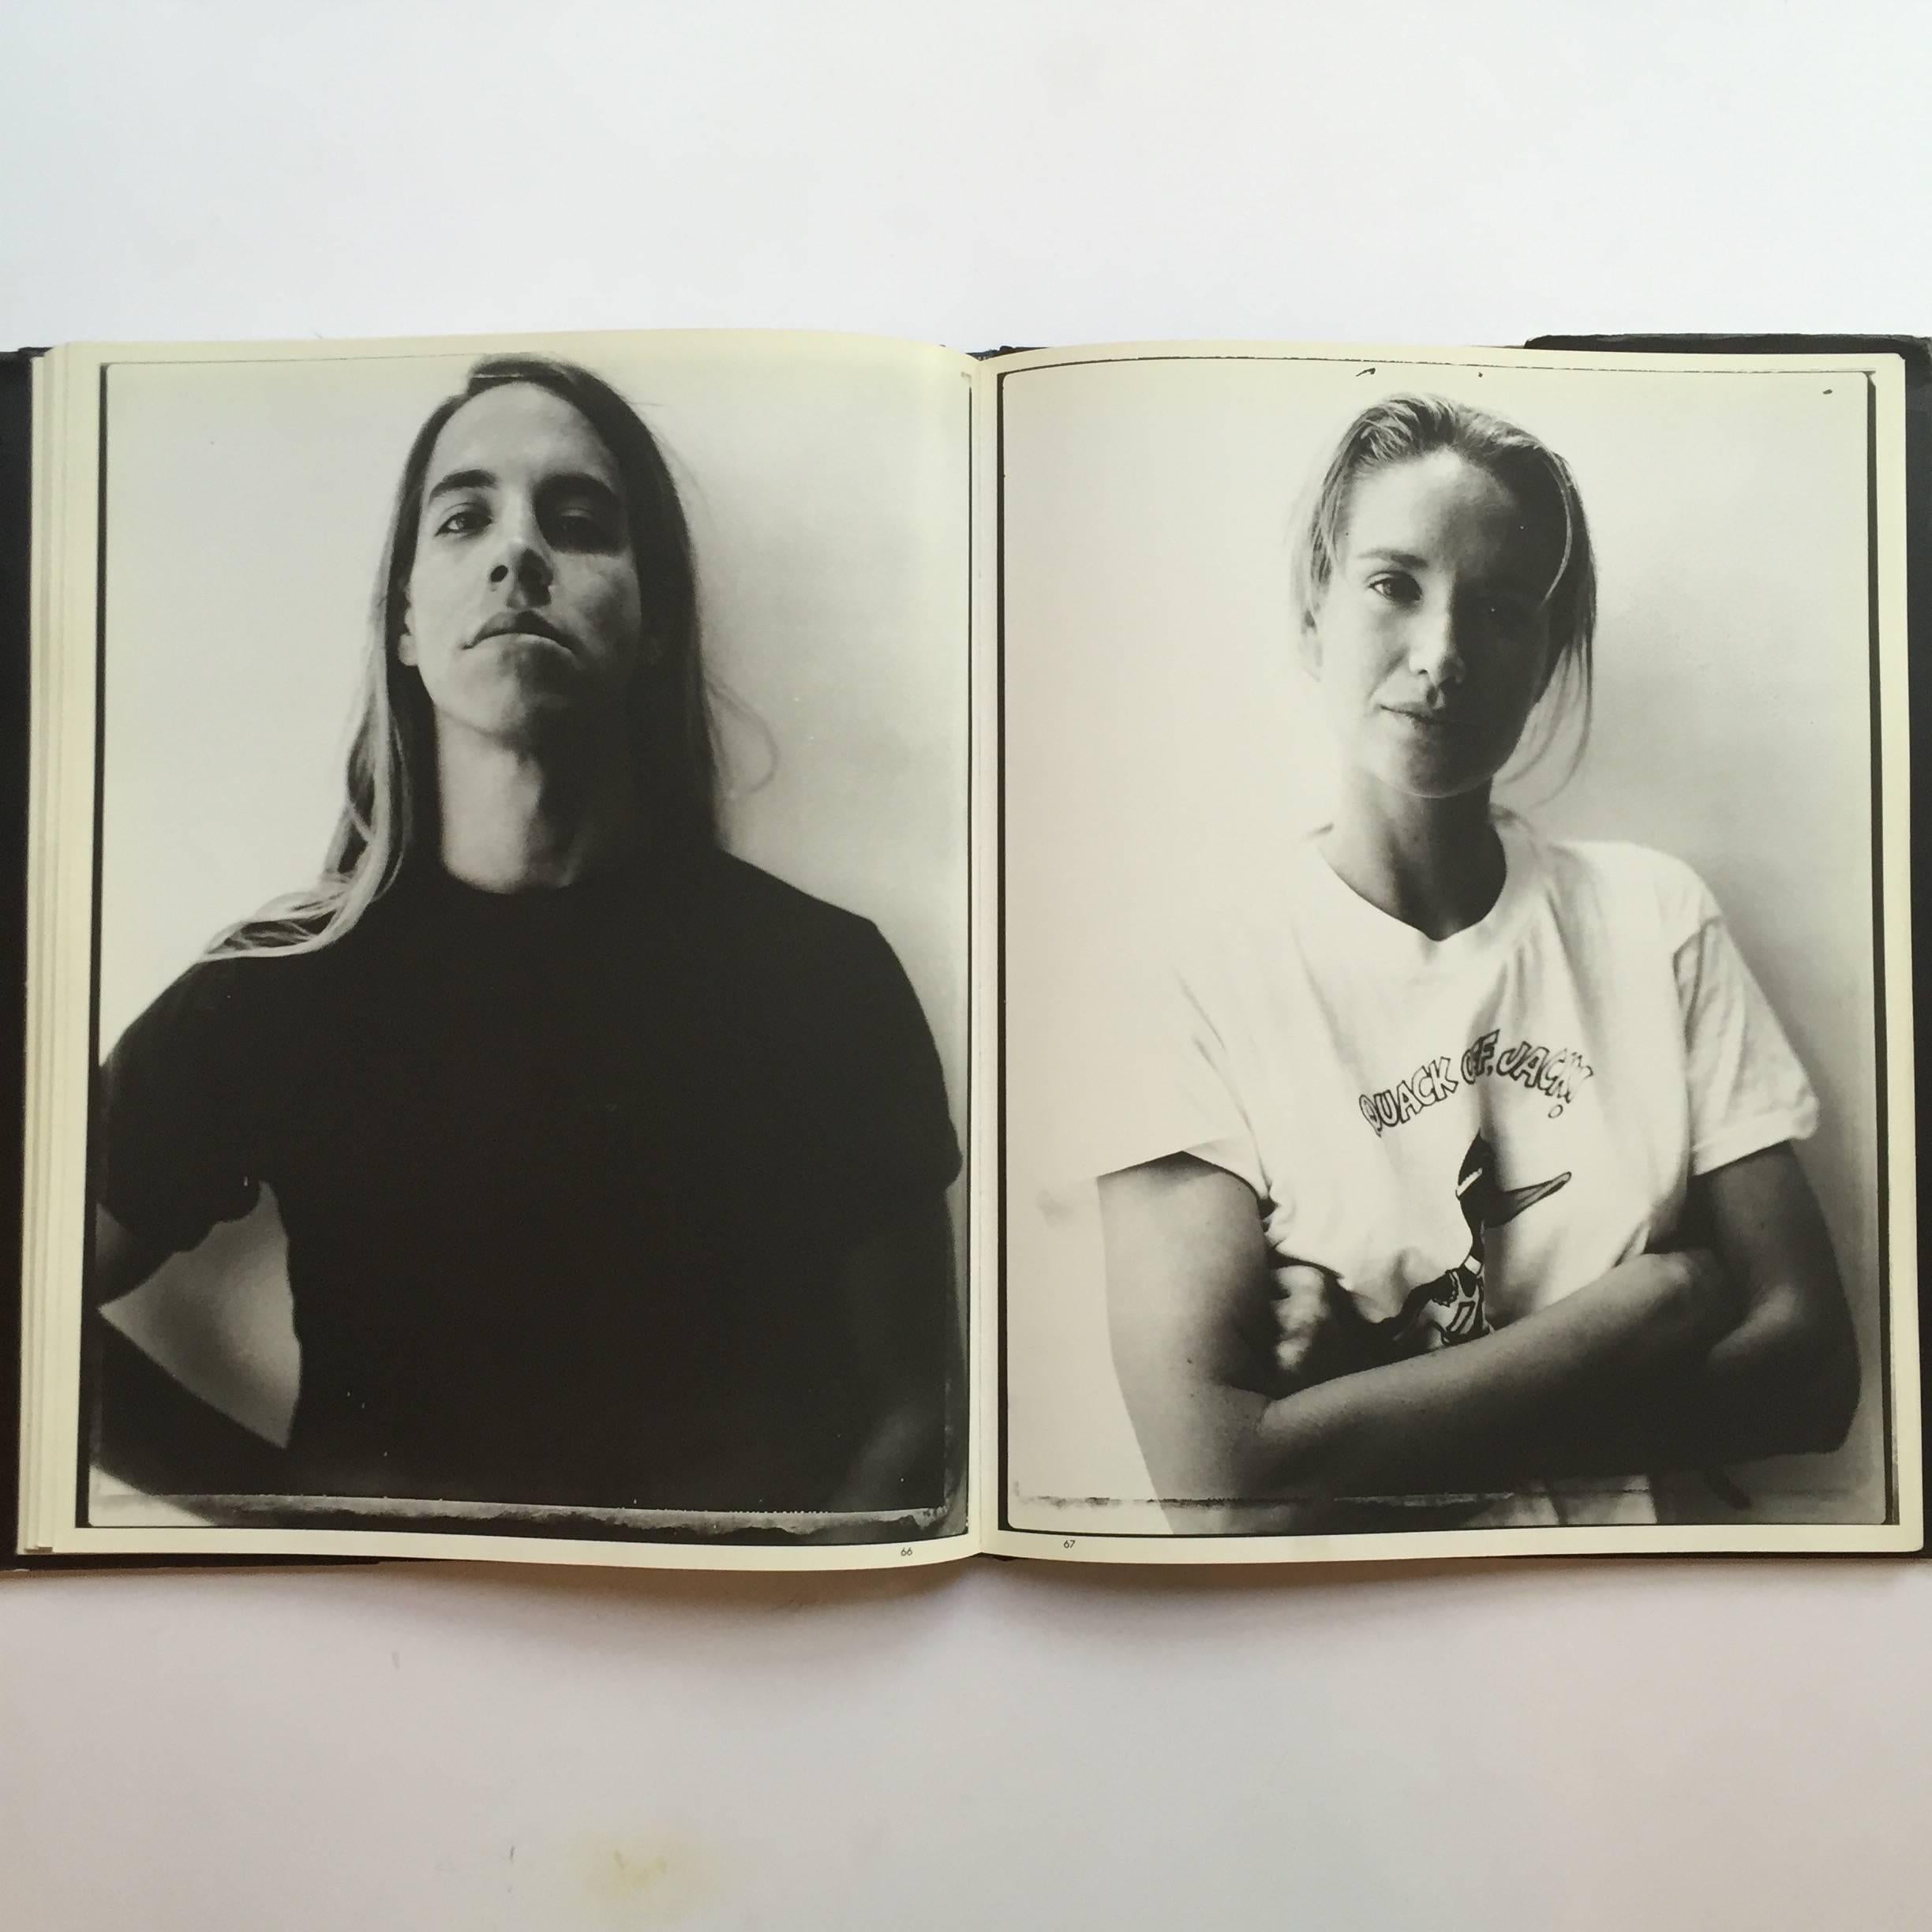 First edition, published by Twin Palms Publishers, 1992

Film director Gus van Sant’s debut collection of portraits taken in New York and Los Angeles between 1988 and 1992. Featuring unadorned, expressive black and white photographs of Van Sant’s